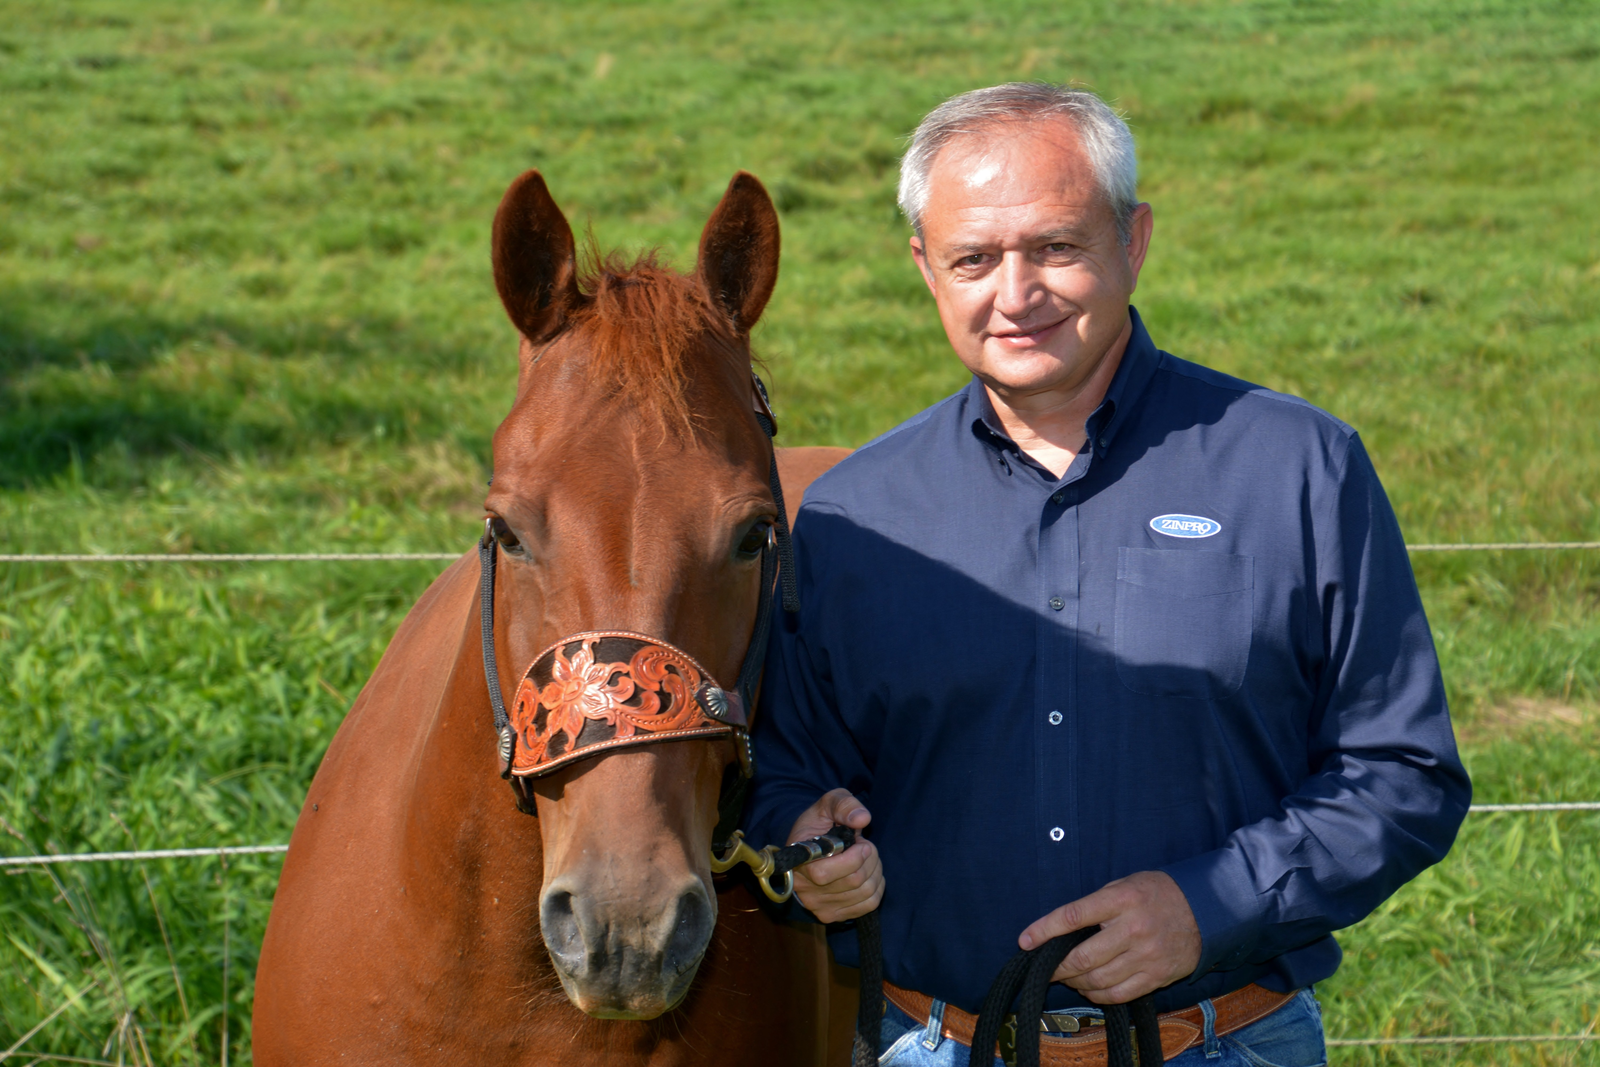 Joseph Carrica: "There used to be only a few choices in the feed additive portfolio that a nutritionist could use in their animal feed formulations. Now there are many." <em>Photo: Zinpro</em>